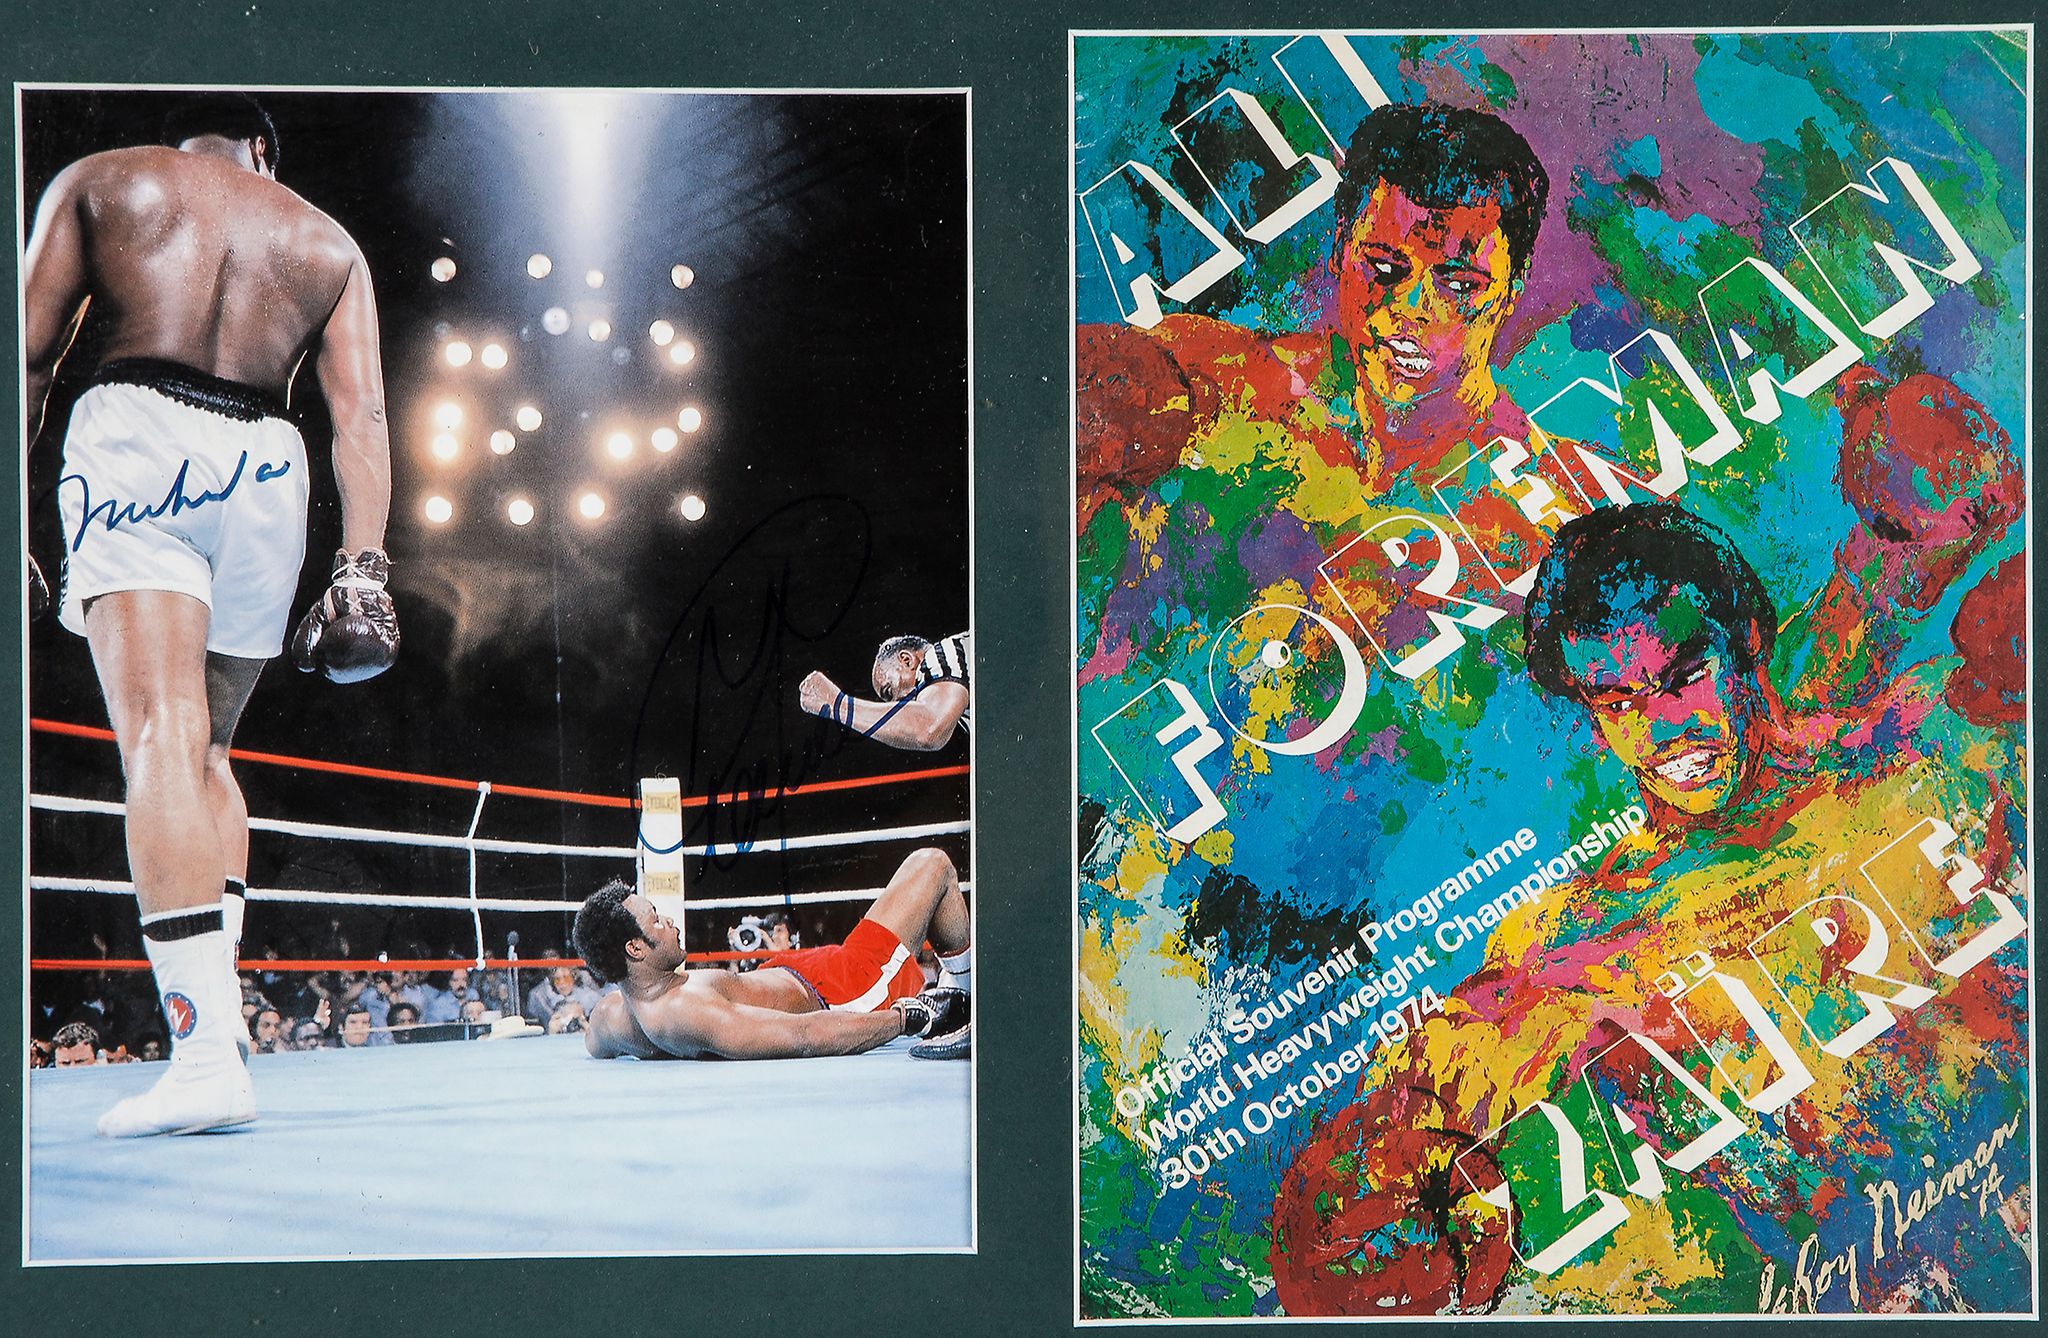 ALI, MUHAMMAD & GEORGE FOREMAN - signed photograph with programme from match Colour photograph of